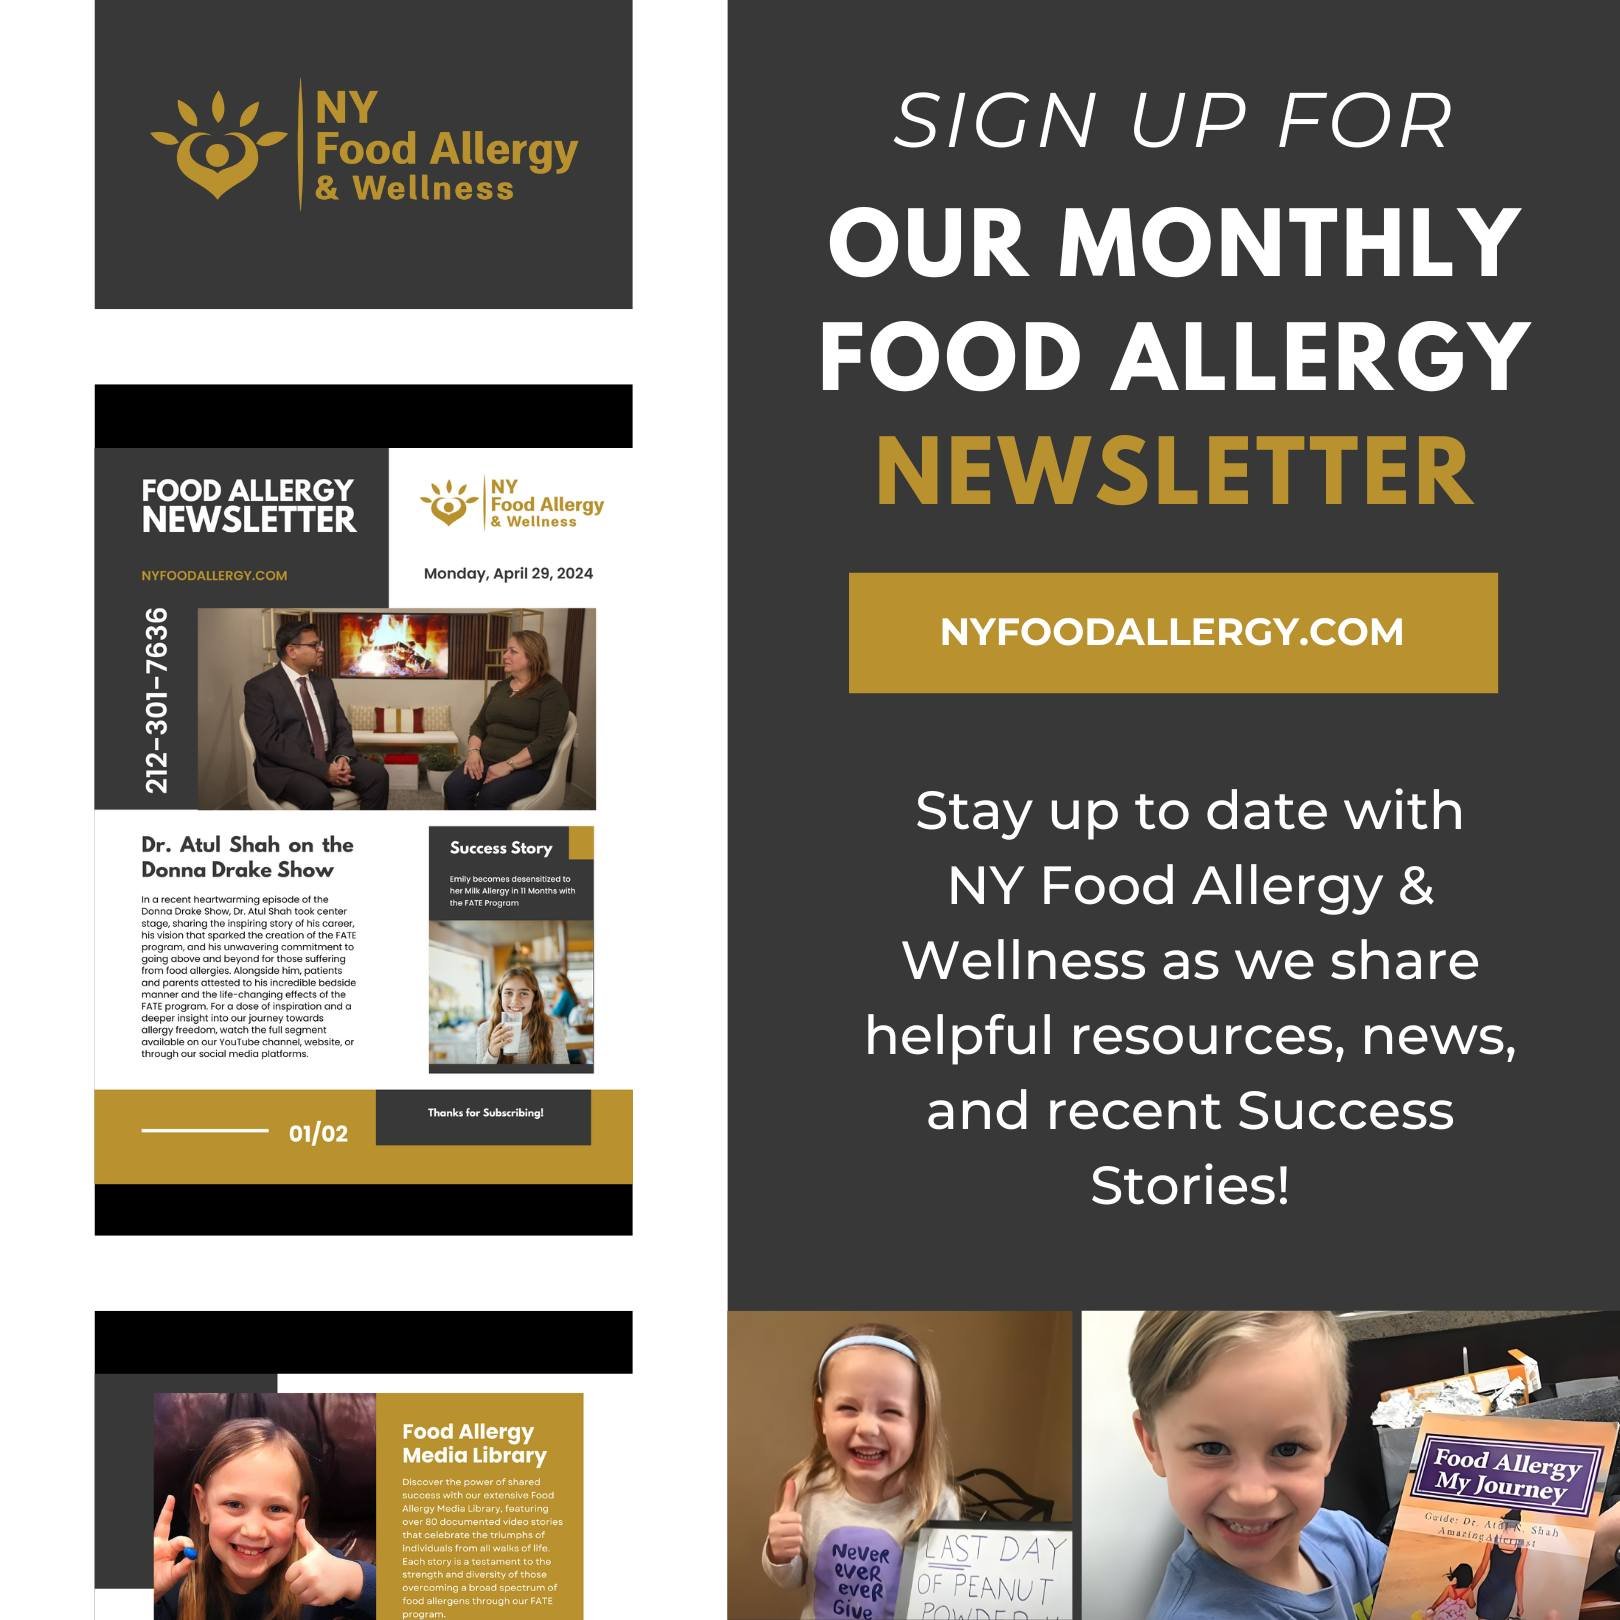 🌟 Join our journey towards freedom from food allergies! 🌟

Sign up for our monthly 📧 Food Allergy Newsletter at NYFoodallergy.com and become part of a community thriving towards &quot;Food Allergy Freedom&quot;. Each month, we share not only the l